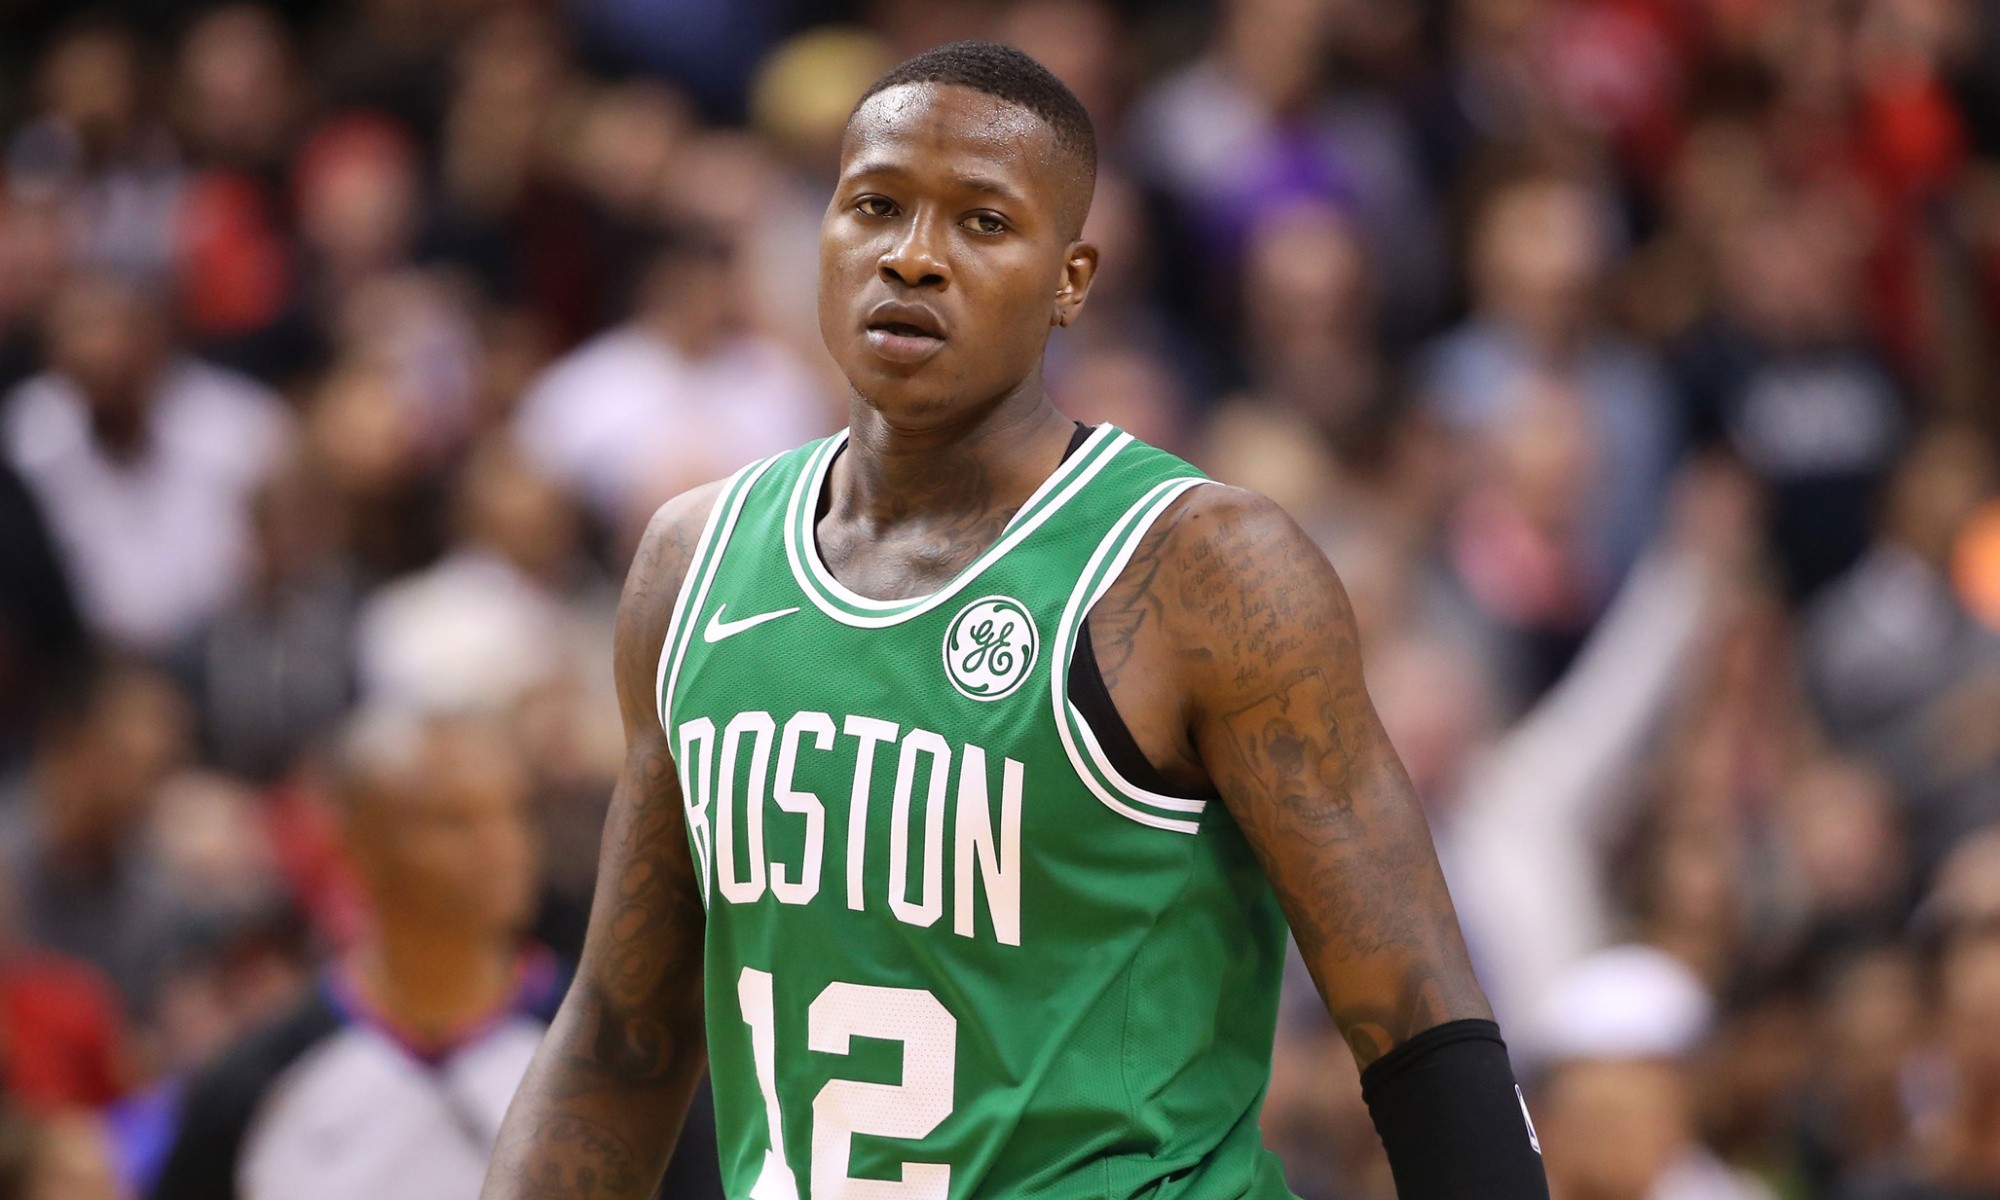 Rumor: Terry Rozier isn't happy with his playing time
